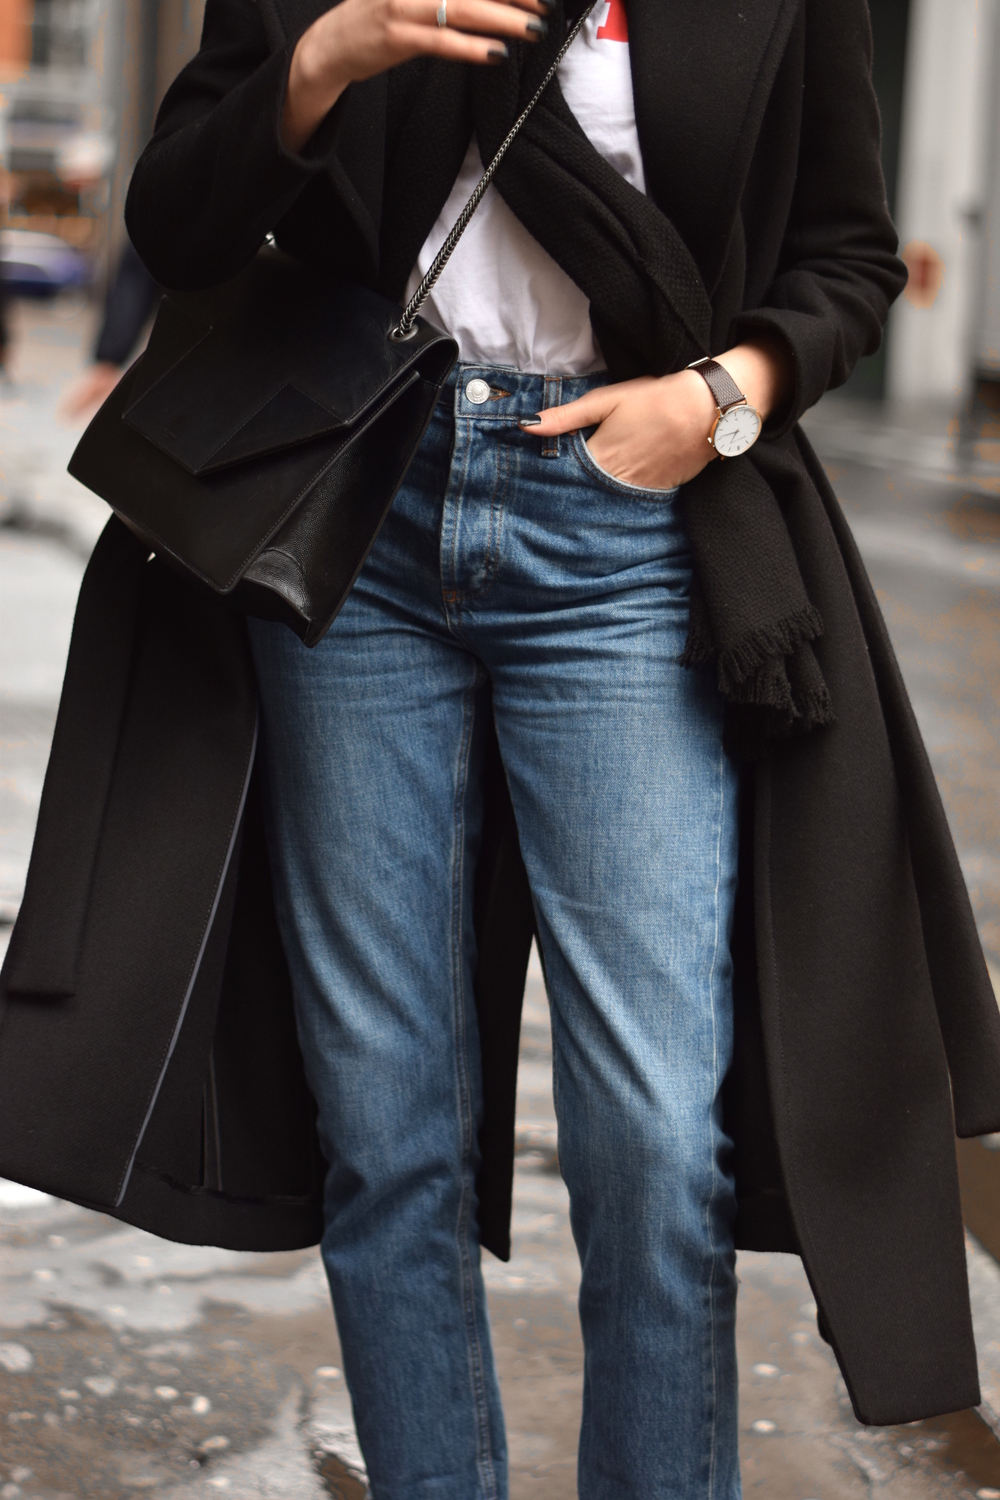 How to get out of a style rut! — Shot From The Street